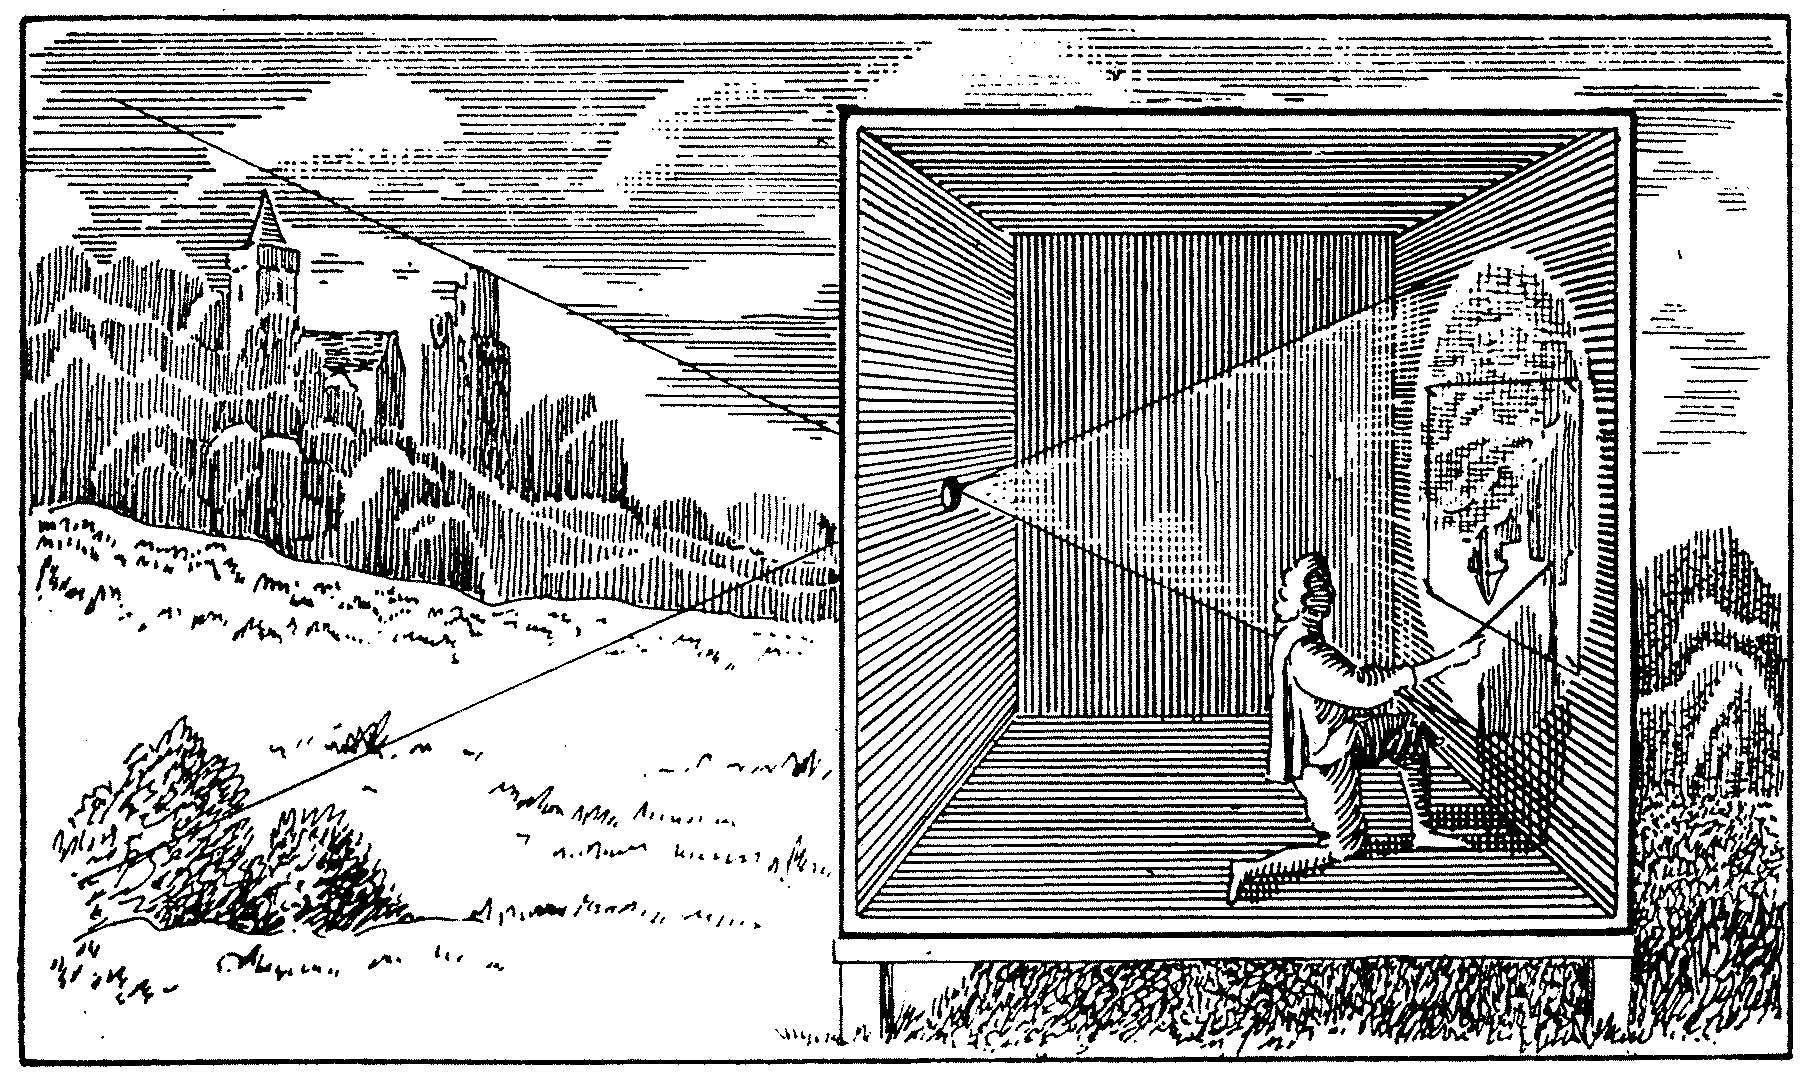 Physics of the photographic camera obscura